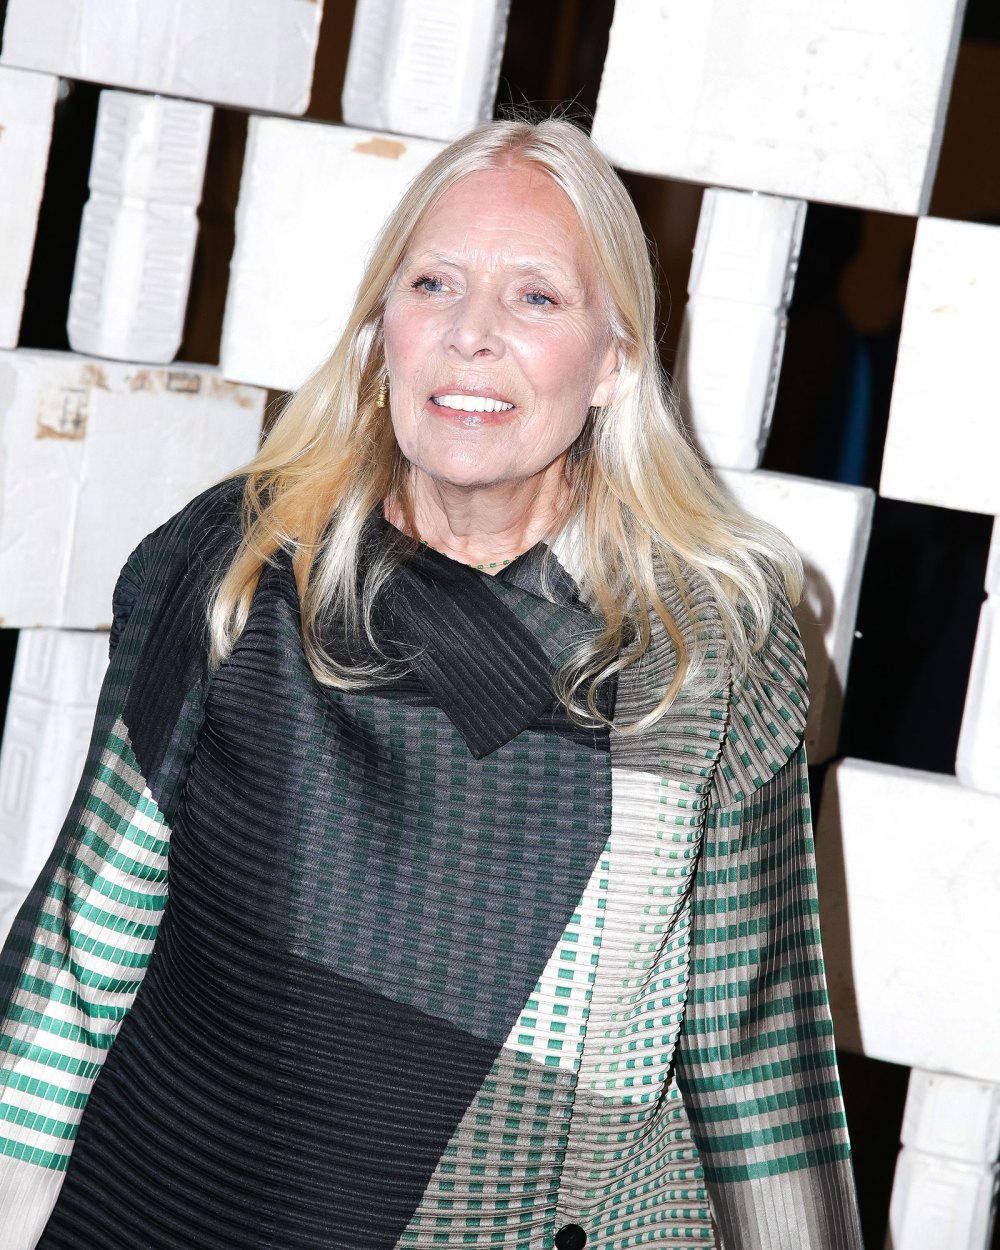 Joni Mitchell Not in a Coma, Is “Alert” and “Has Her Full Senses”